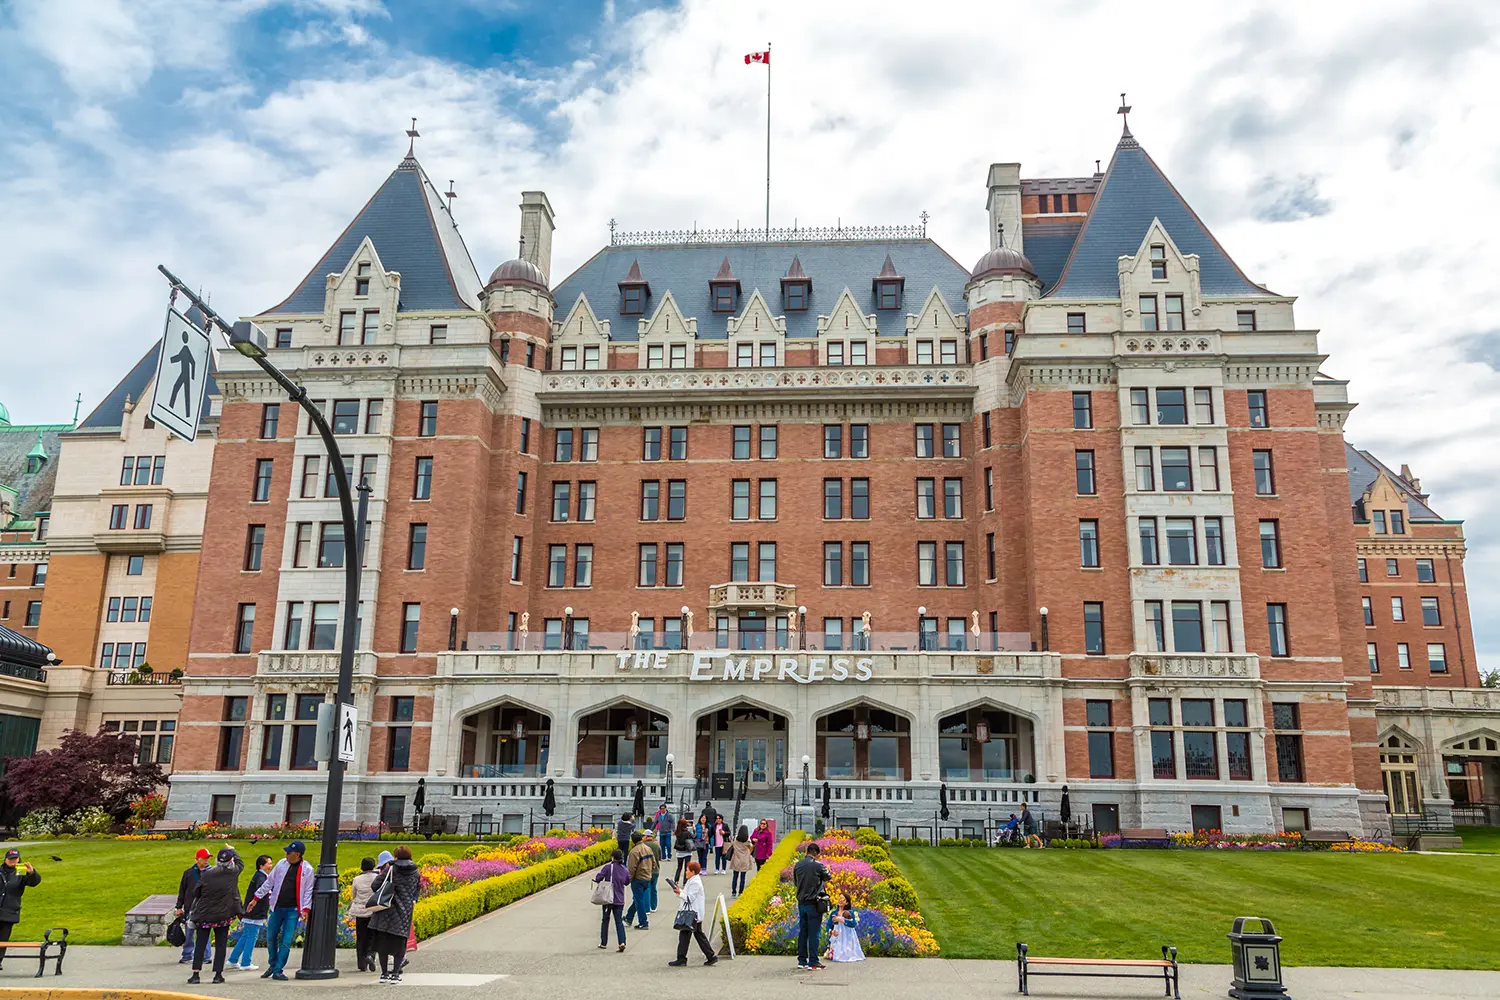 Tourists at The Empress Hotel in Victoria, Canada